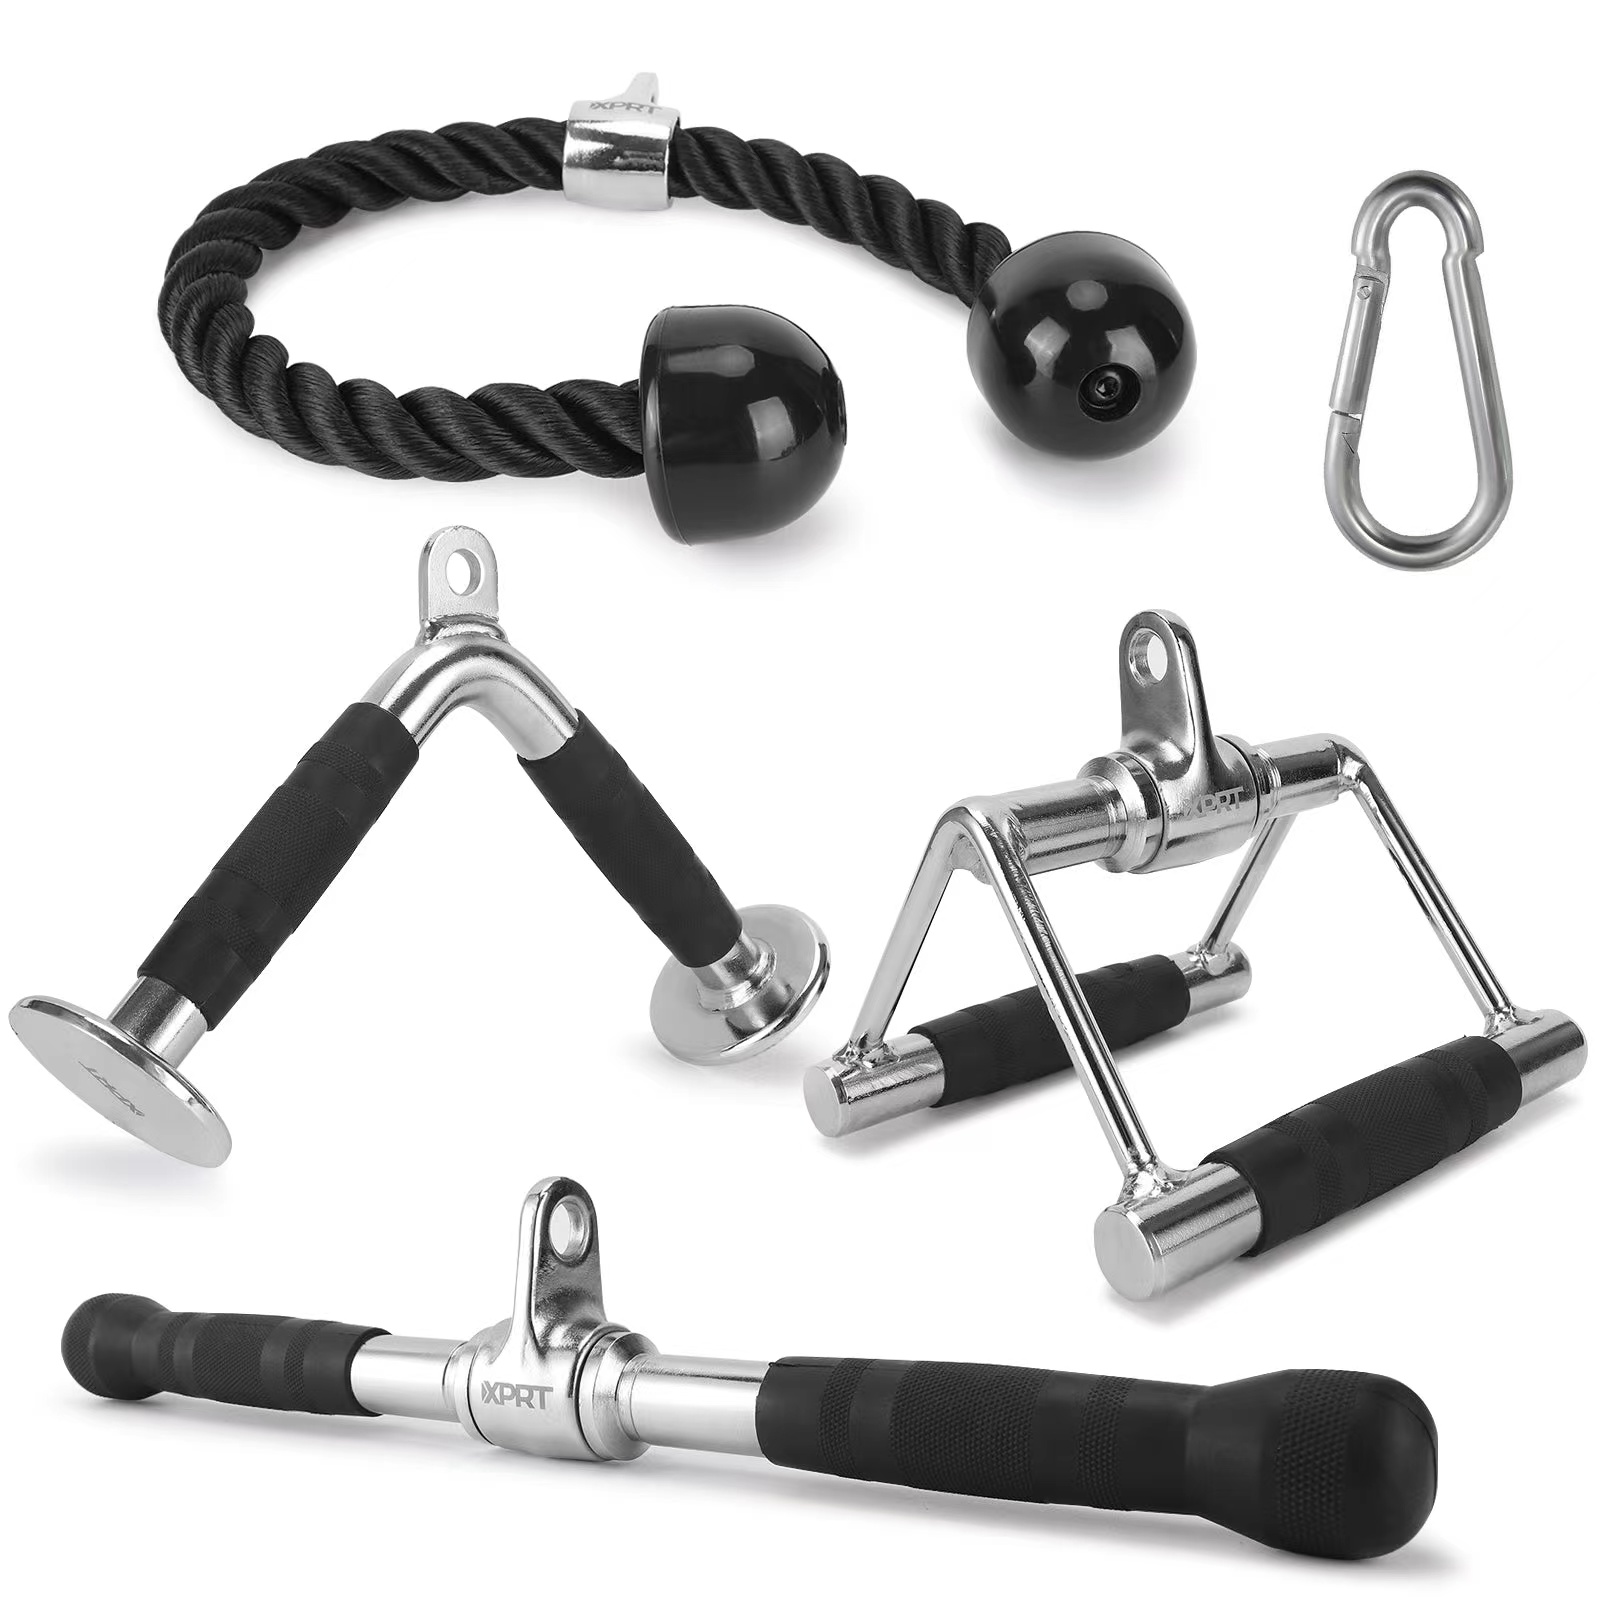 CABLE ATTACHMENT SET OF 4 V HANDLE WITH ROTATION, ROTATING BAR, TRICEP ROPE, V-SHAPED BAR